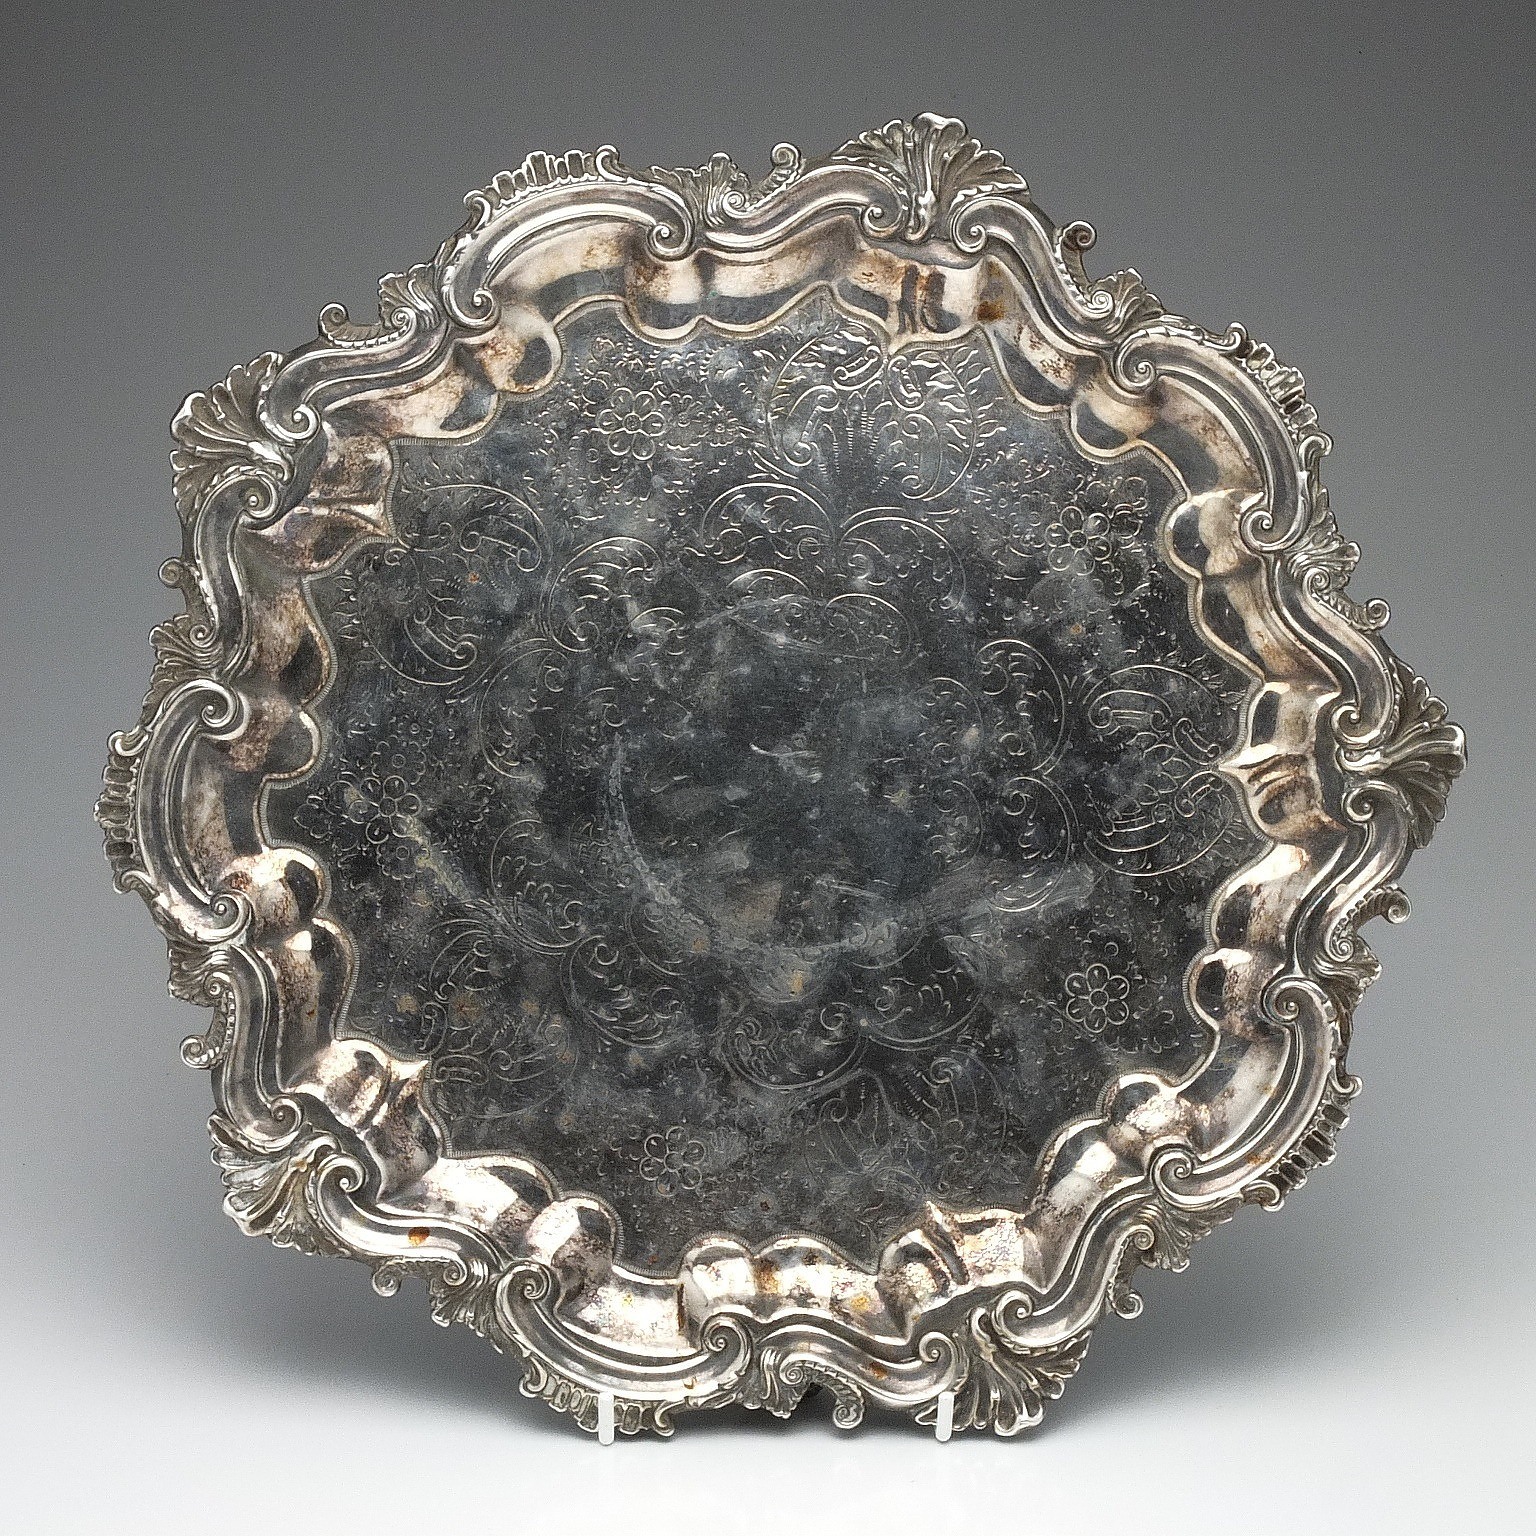 'English Silver Plate Chased, Bright Cut and Engraved Footed Dish'